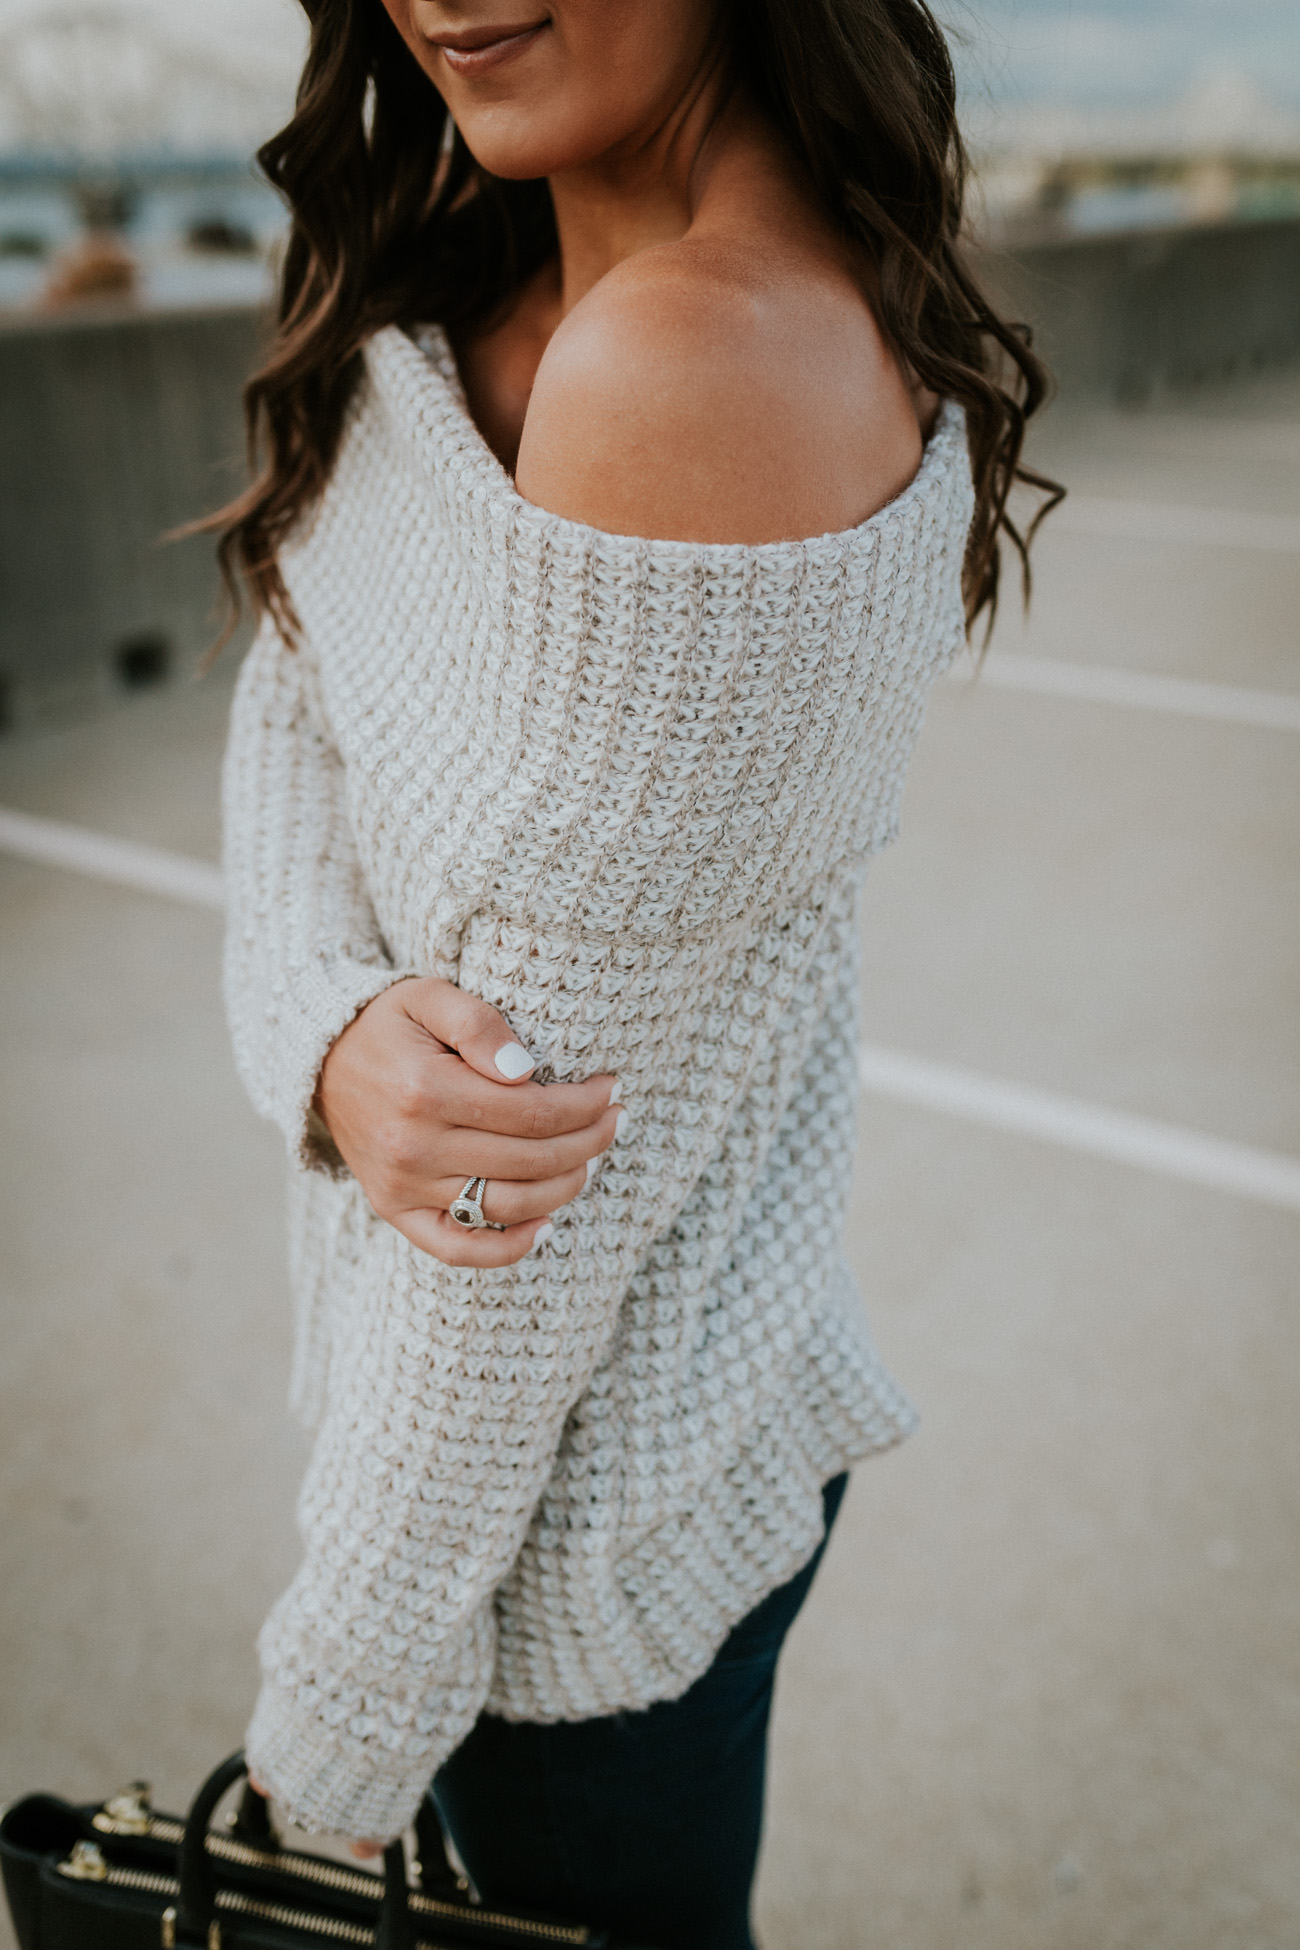 Petite Fashion and Style Blog, J.O.A. Off the Shoulder Cable Sweater, Tory Burch Riding Boots